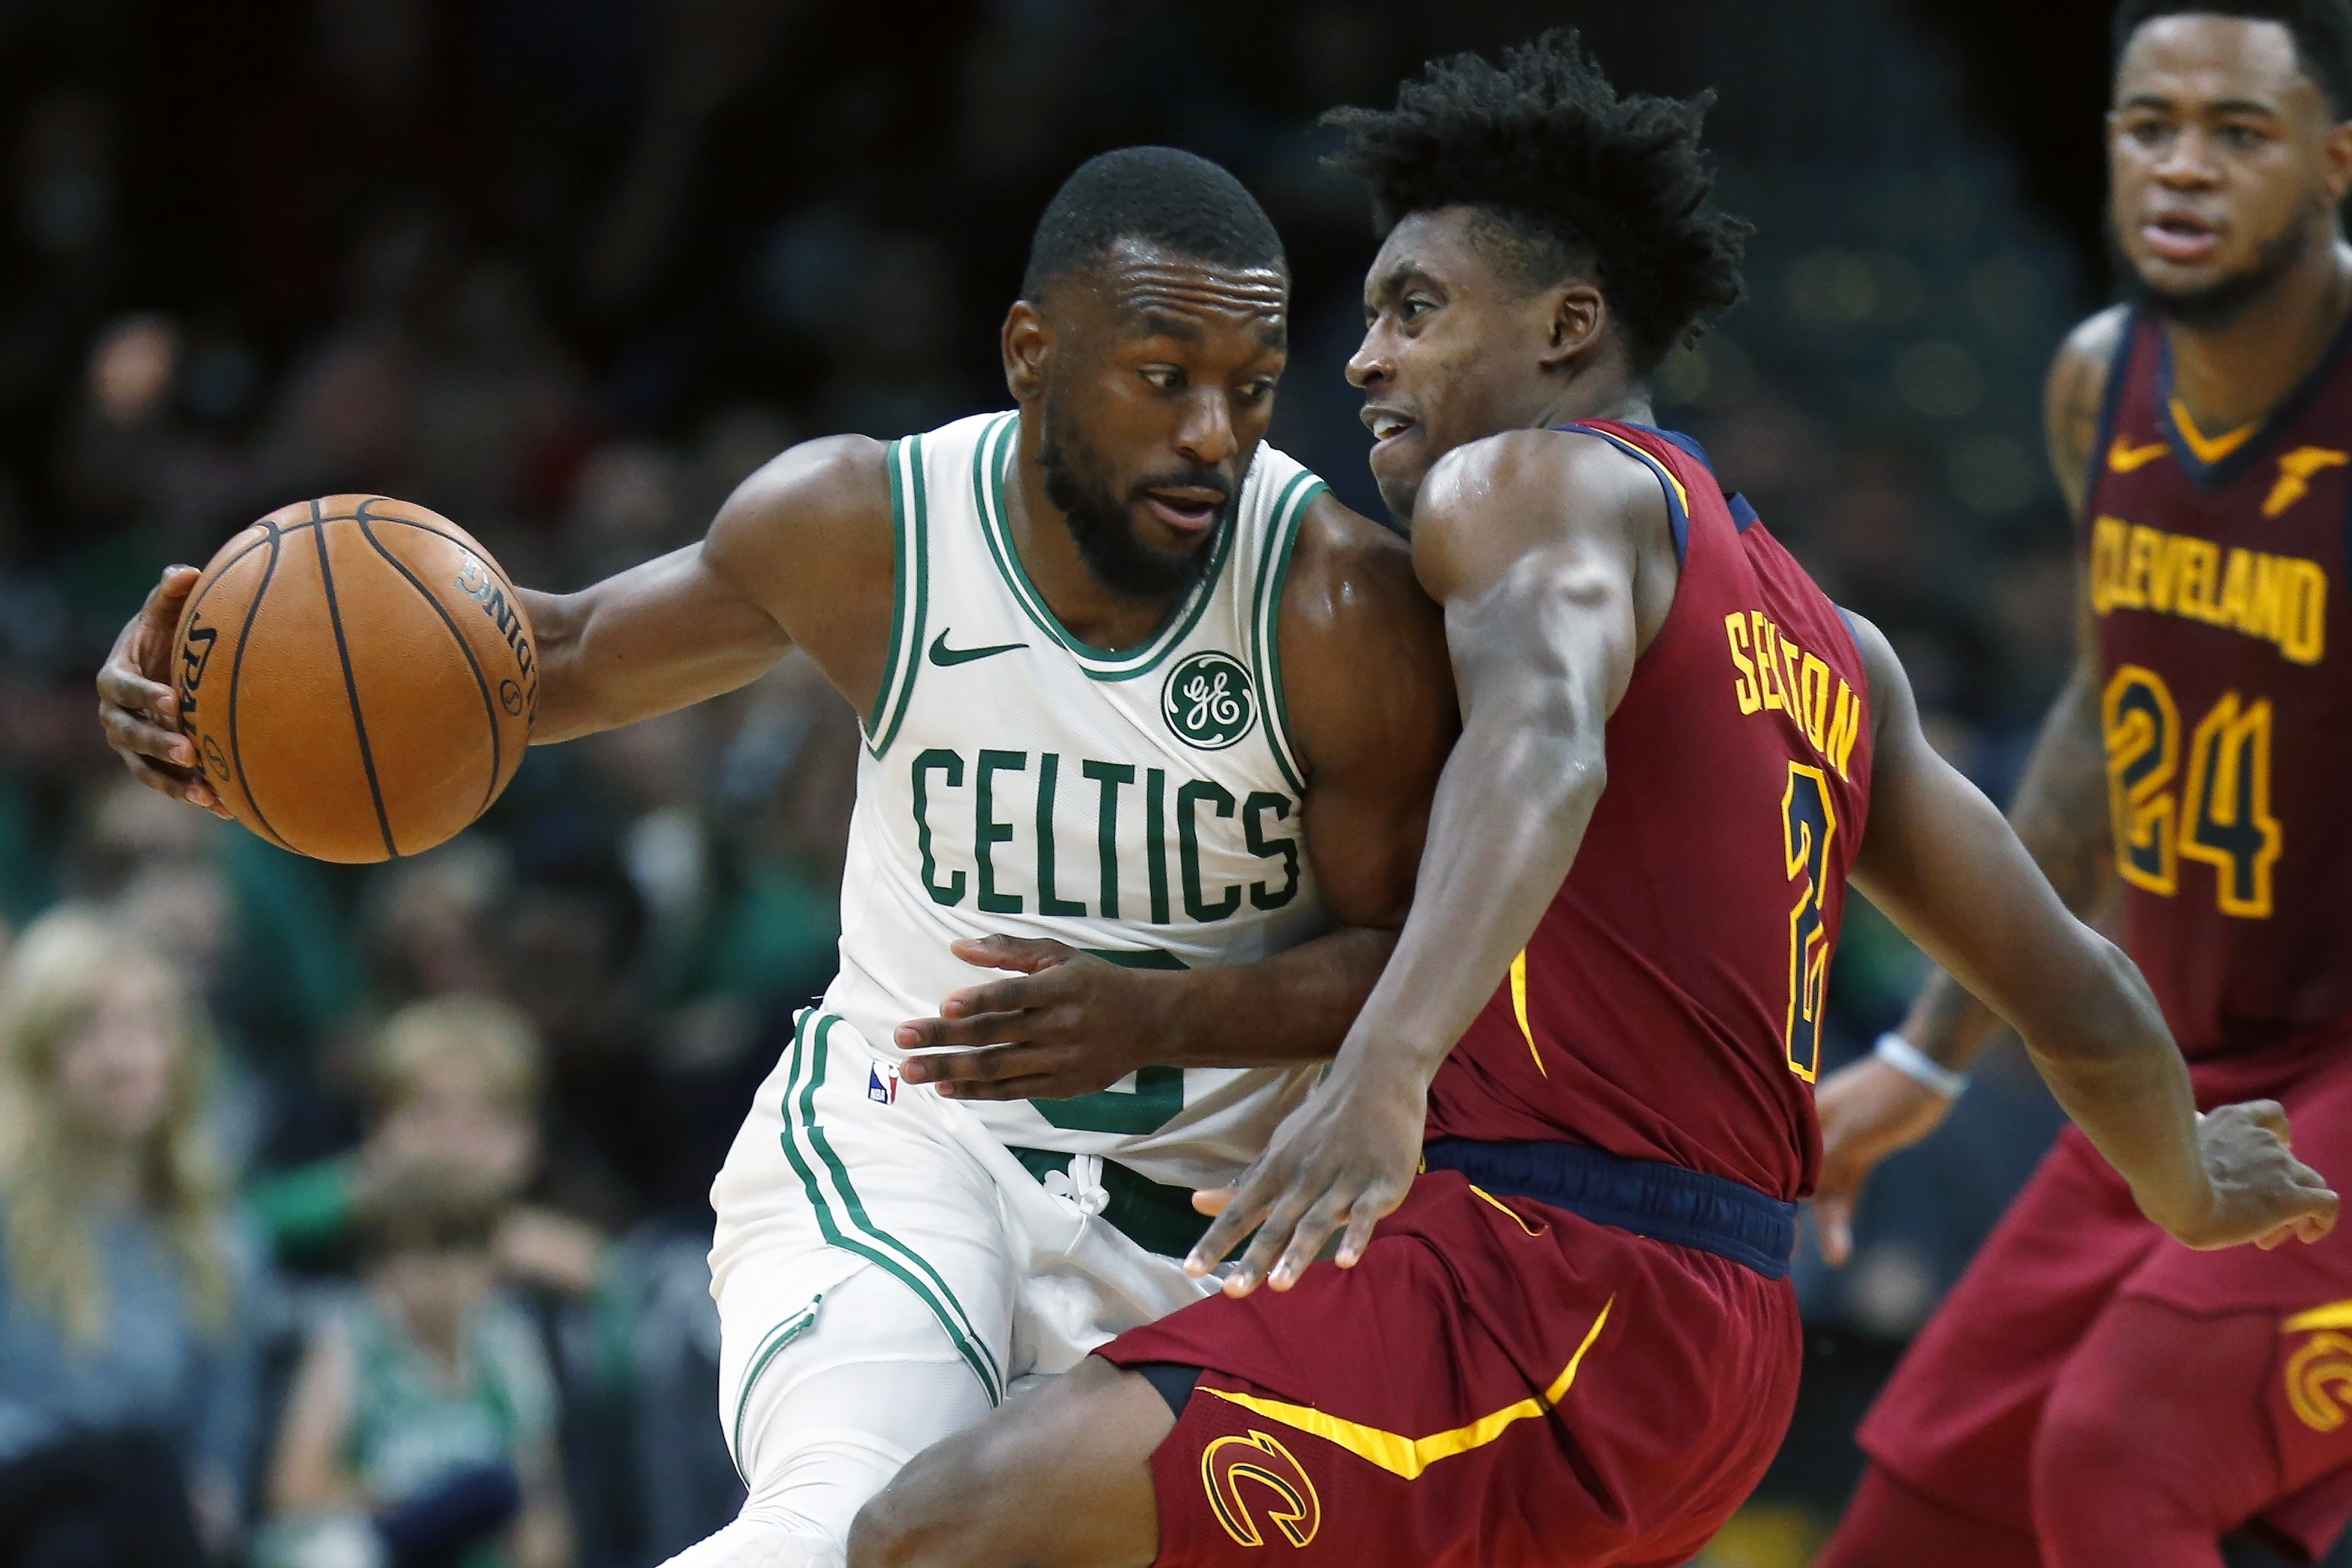 Expectations still high for Celtics after Irving's departure